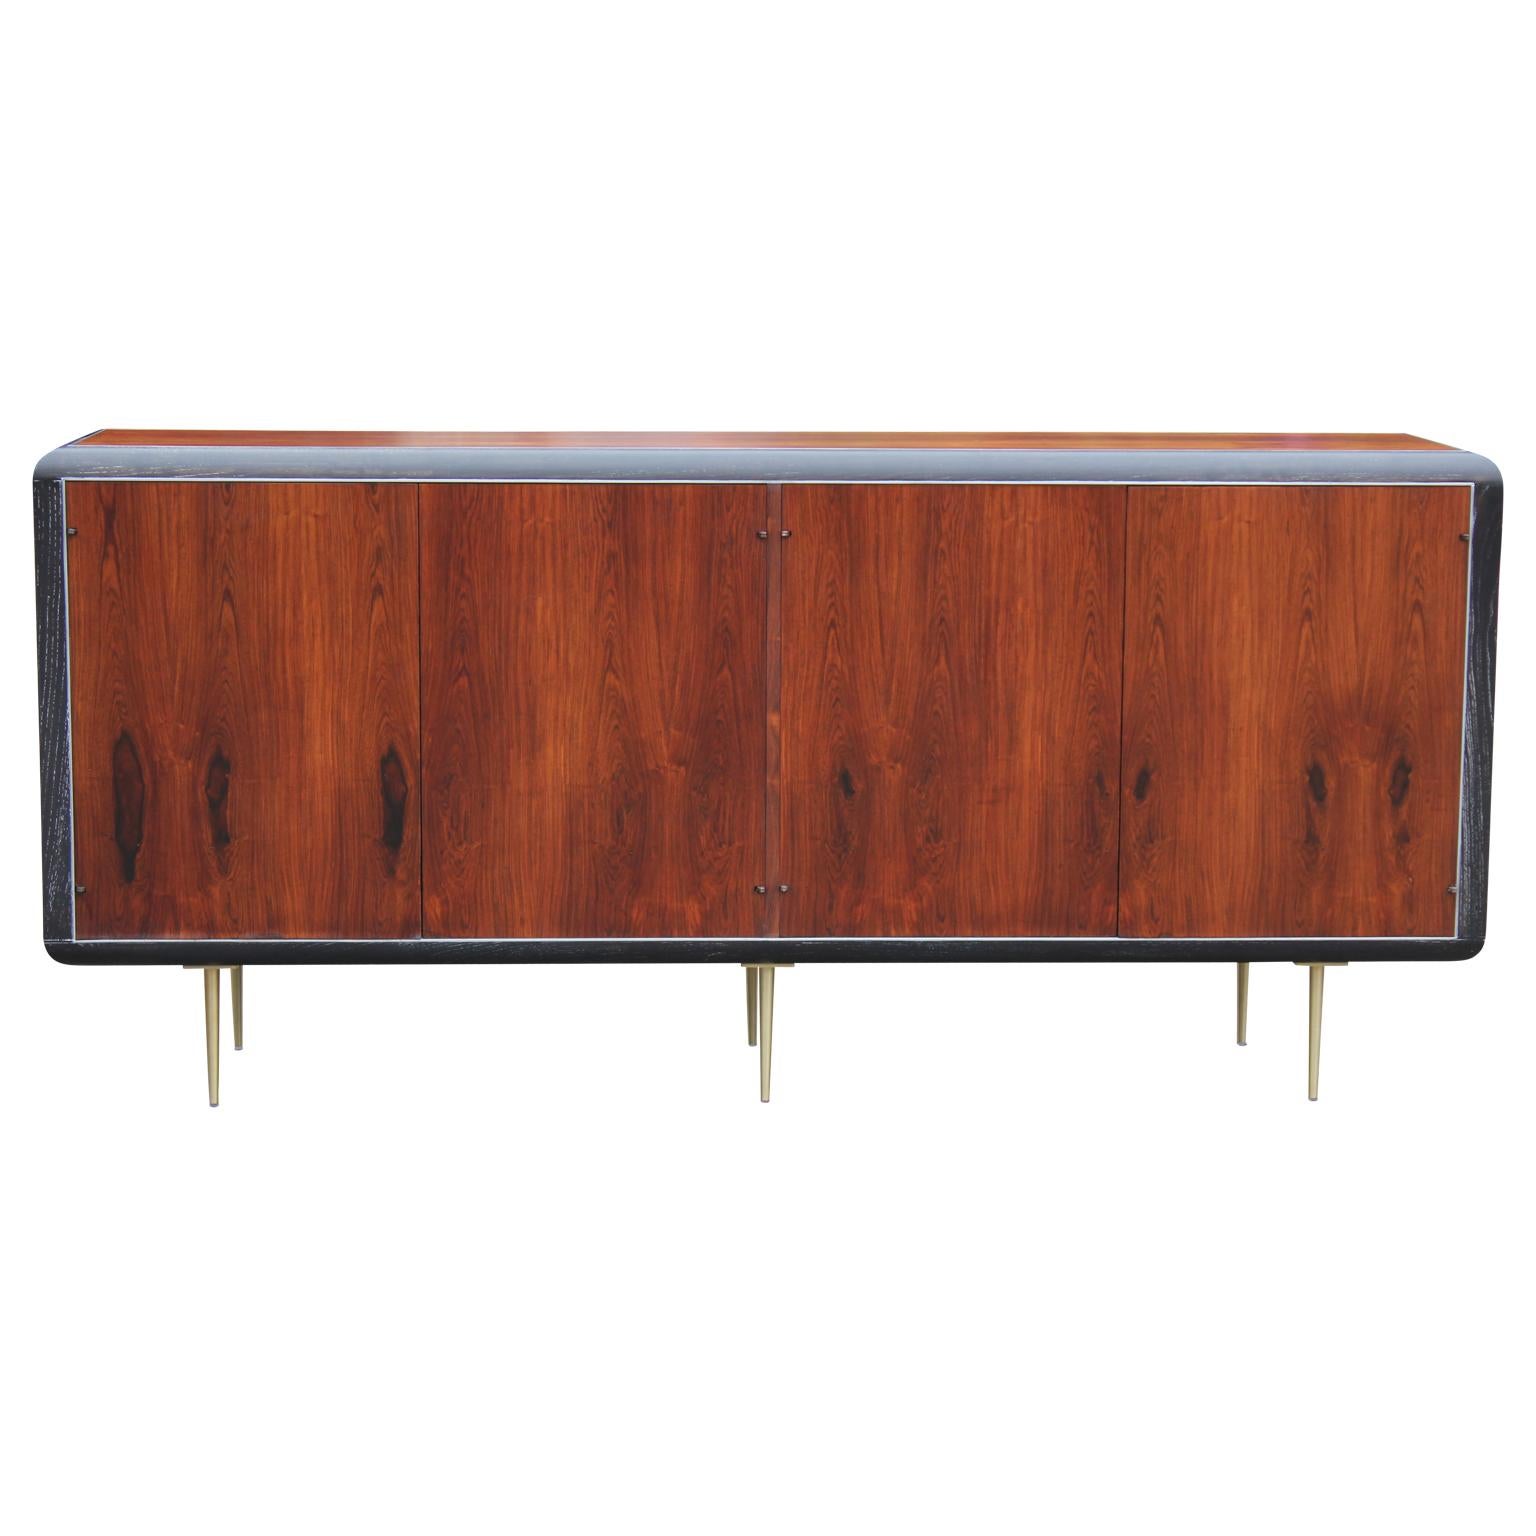 Beautiful modern rosewood, brass and chrome sideboard or credenza by Glenn of California, circa 1960s.